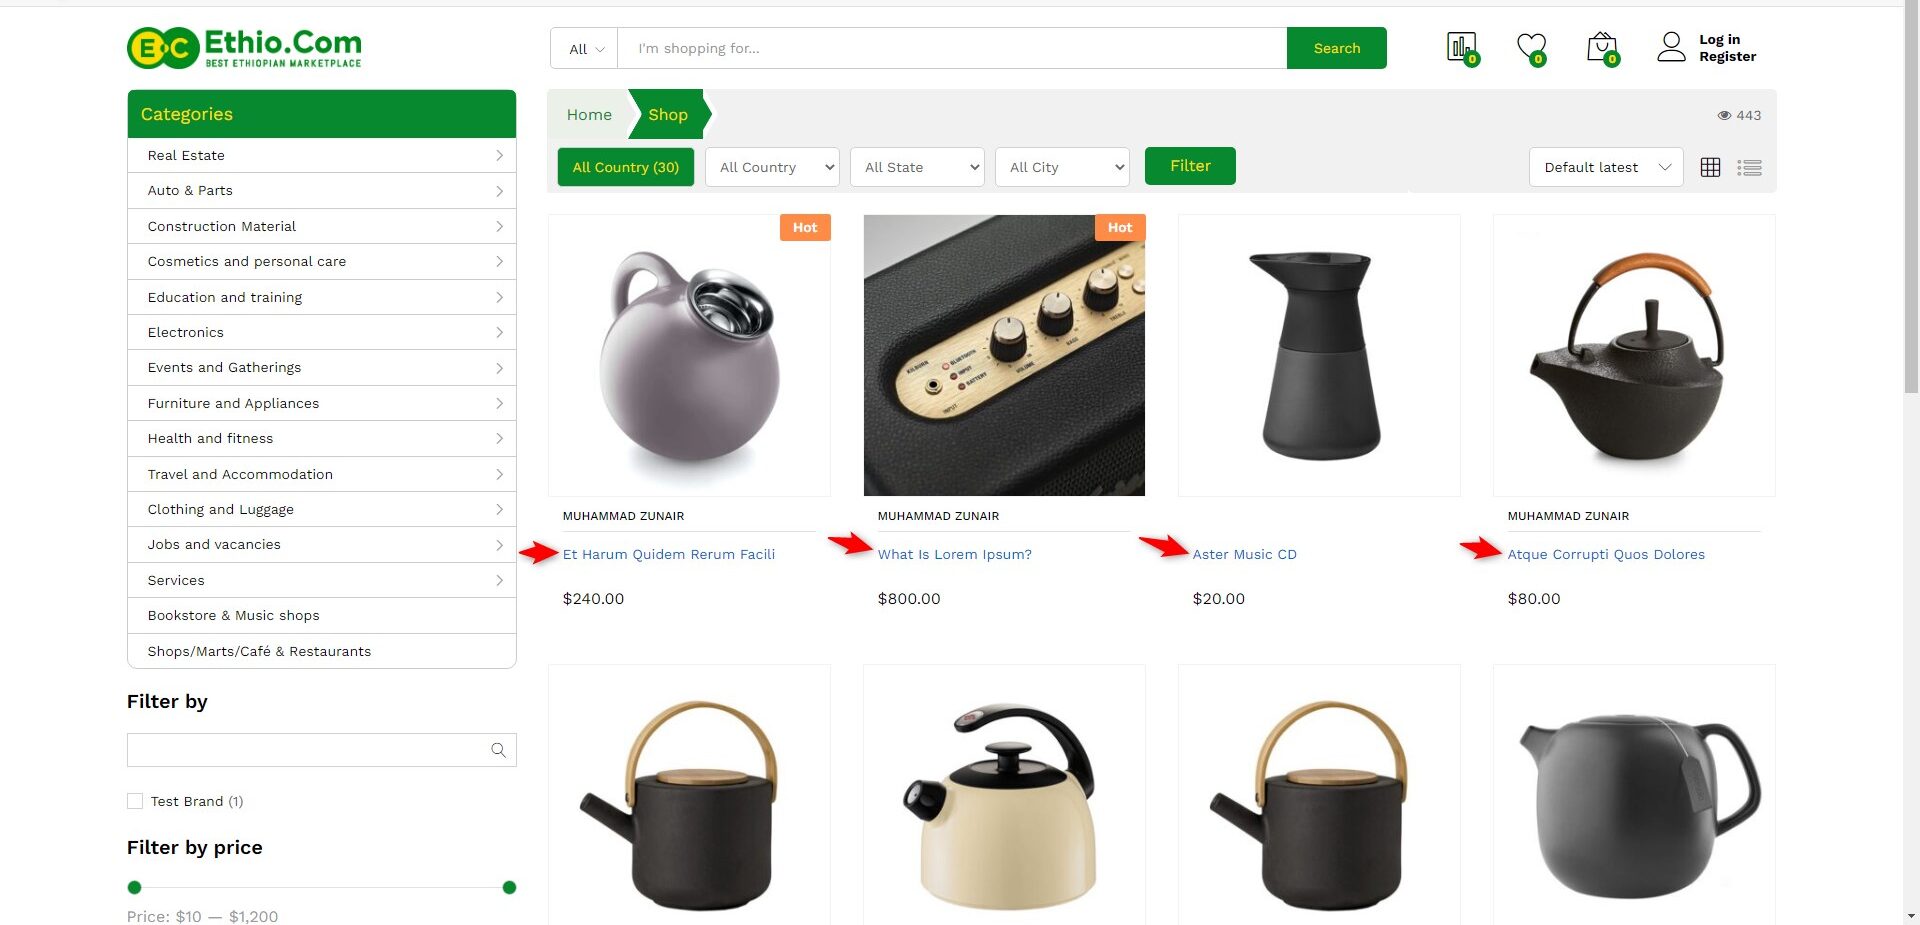 How product titles appear on Ethio.com home page